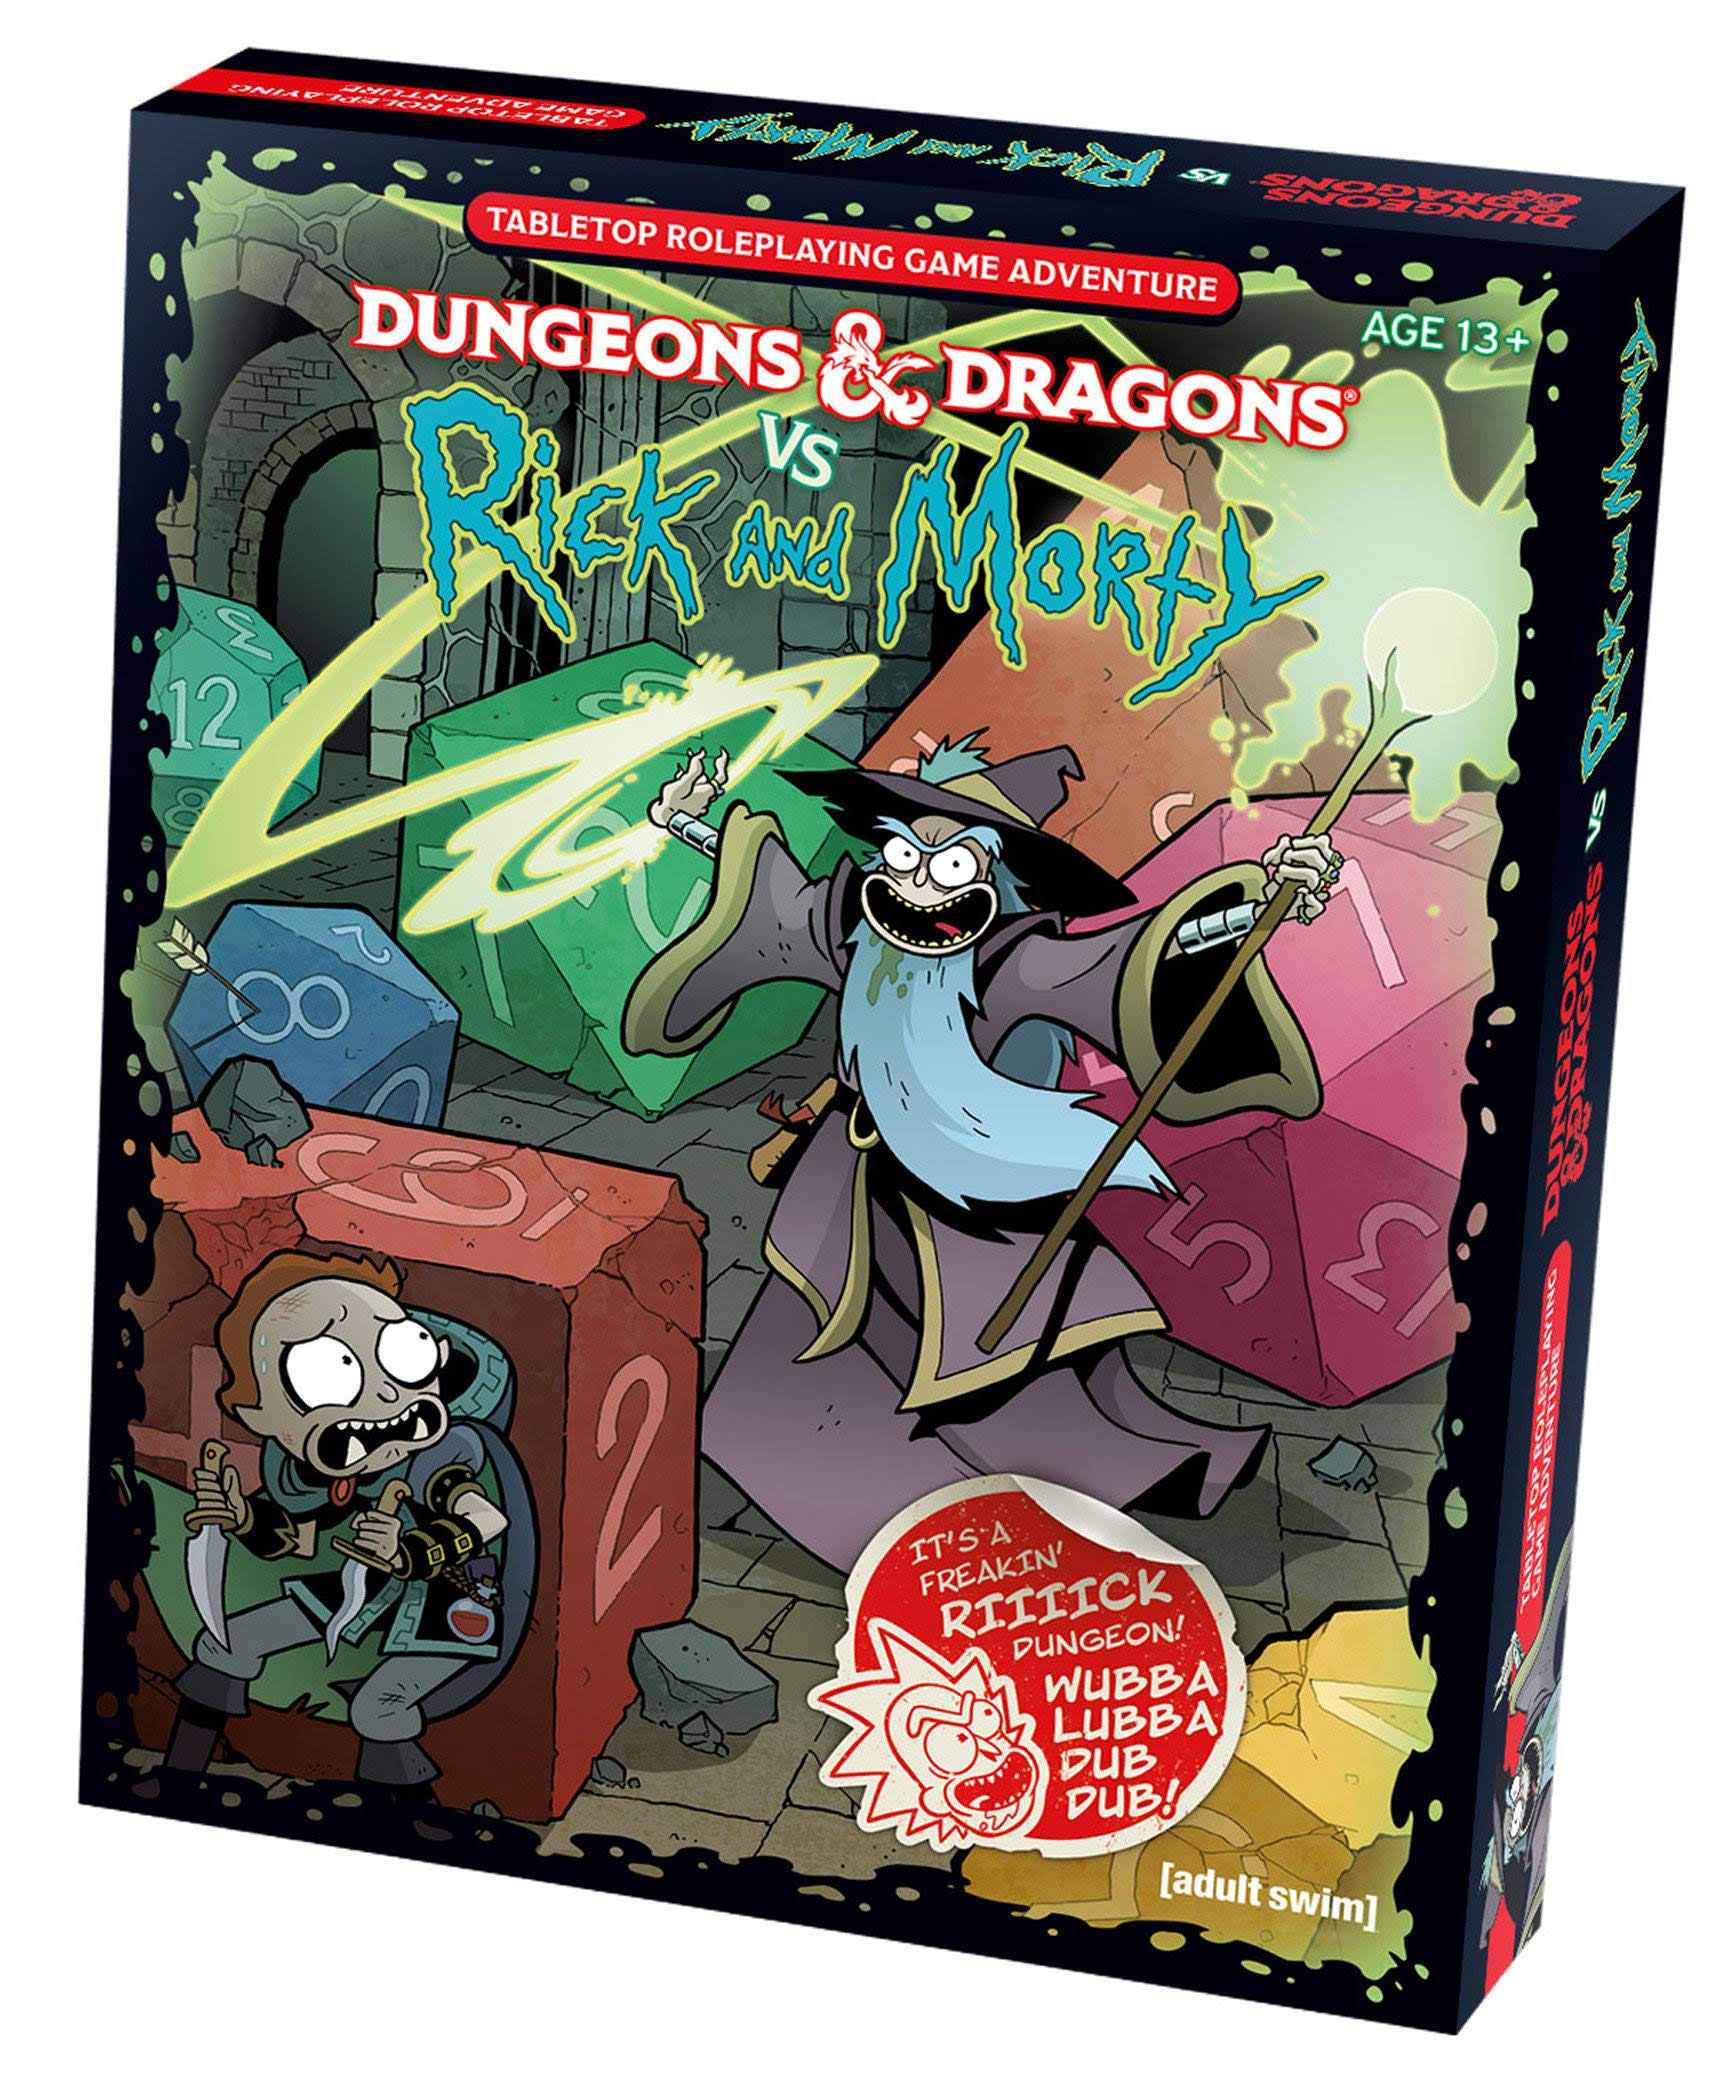 Dungeons & Dragons VS Rick and Morty (D&D Tabletop Roleplaying Game Adventure Boxed Set)